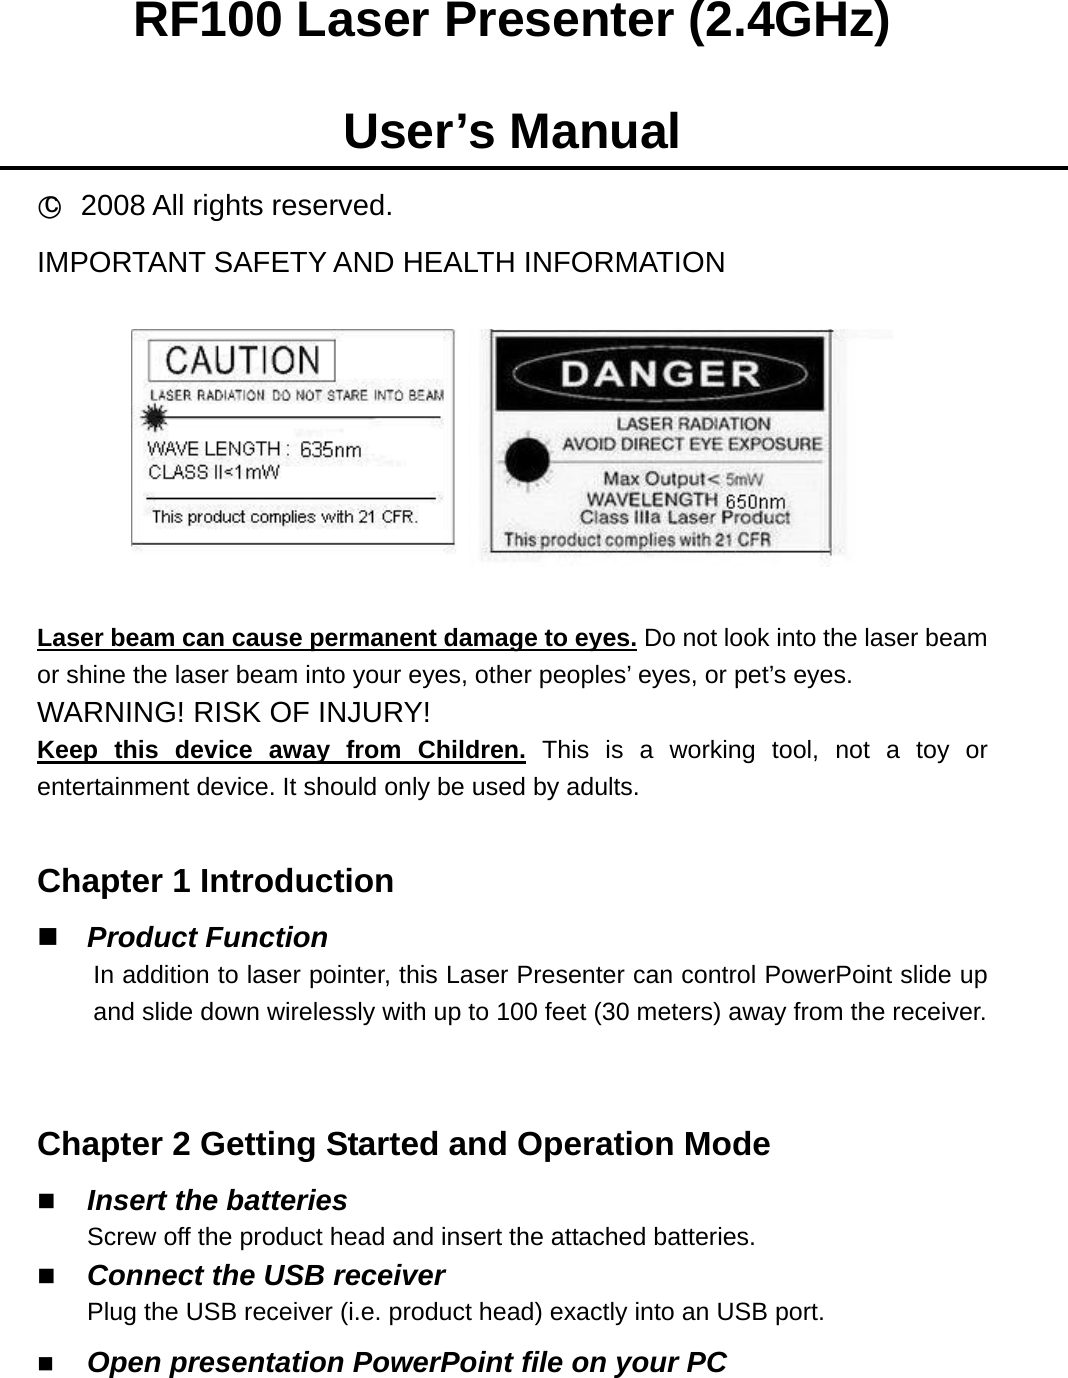 RF100 Laser Presenter (2.4GHz)  User’s Manual ○c 2008 All rights reserved. IMPORTANT SAFETY AND HEALTH INFORMATION    Laser beam can cause permanent damage to eyes. Do not look into the laser beam or shine the laser beam into your eyes, other peoples’ eyes, or pet’s eyes. WARNING! RISK OF INJURY! Keep this device away from Children. This is a working tool, not a toy or entertainment device. It should only be used by adults.  Chapter 1 Introduction  Product Function In addition to laser pointer, this Laser Presenter can control PowerPoint slide up and slide down wirelessly with up to 100 feet (30 meters) away from the receiver.  Chapter 2 Getting Started and Operation Mode  Insert the batteries Screw off the product head and insert the attached batteries.  Connect the USB receiver Plug the USB receiver (i.e. product head) exactly into an USB port.  Open presentation PowerPoint file on your PC   